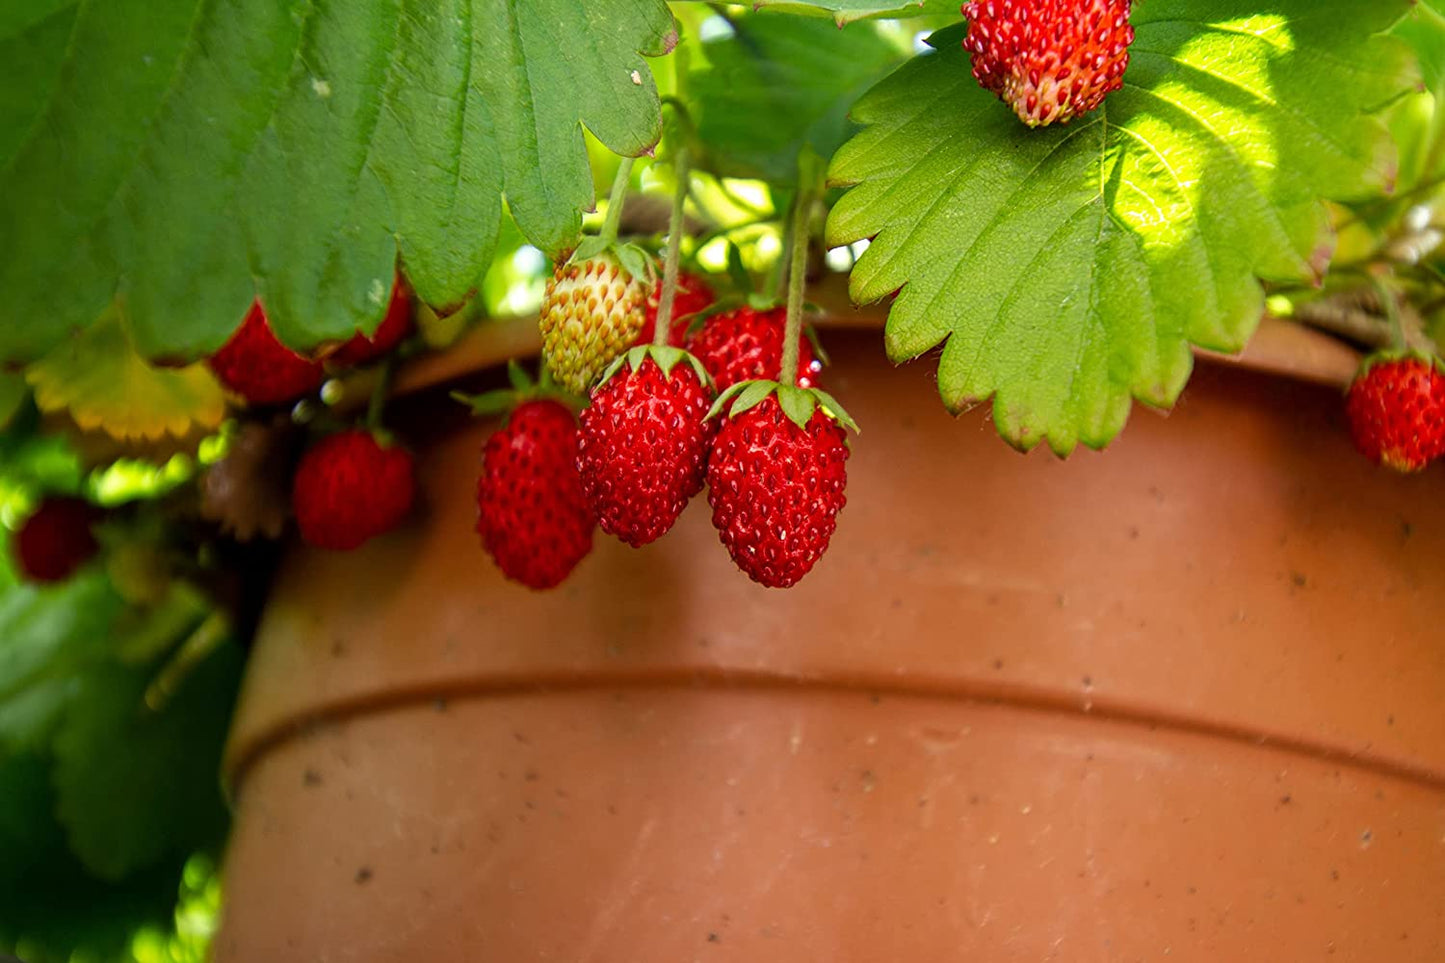 Hundredfold Wild Strawberry 2 Bare-Root Live Plants - Non-GMO Fragaria virginiana, Bare Rooted, Canada Native, Ontario Grown, for Container, Yard, Garden & Ground Cover